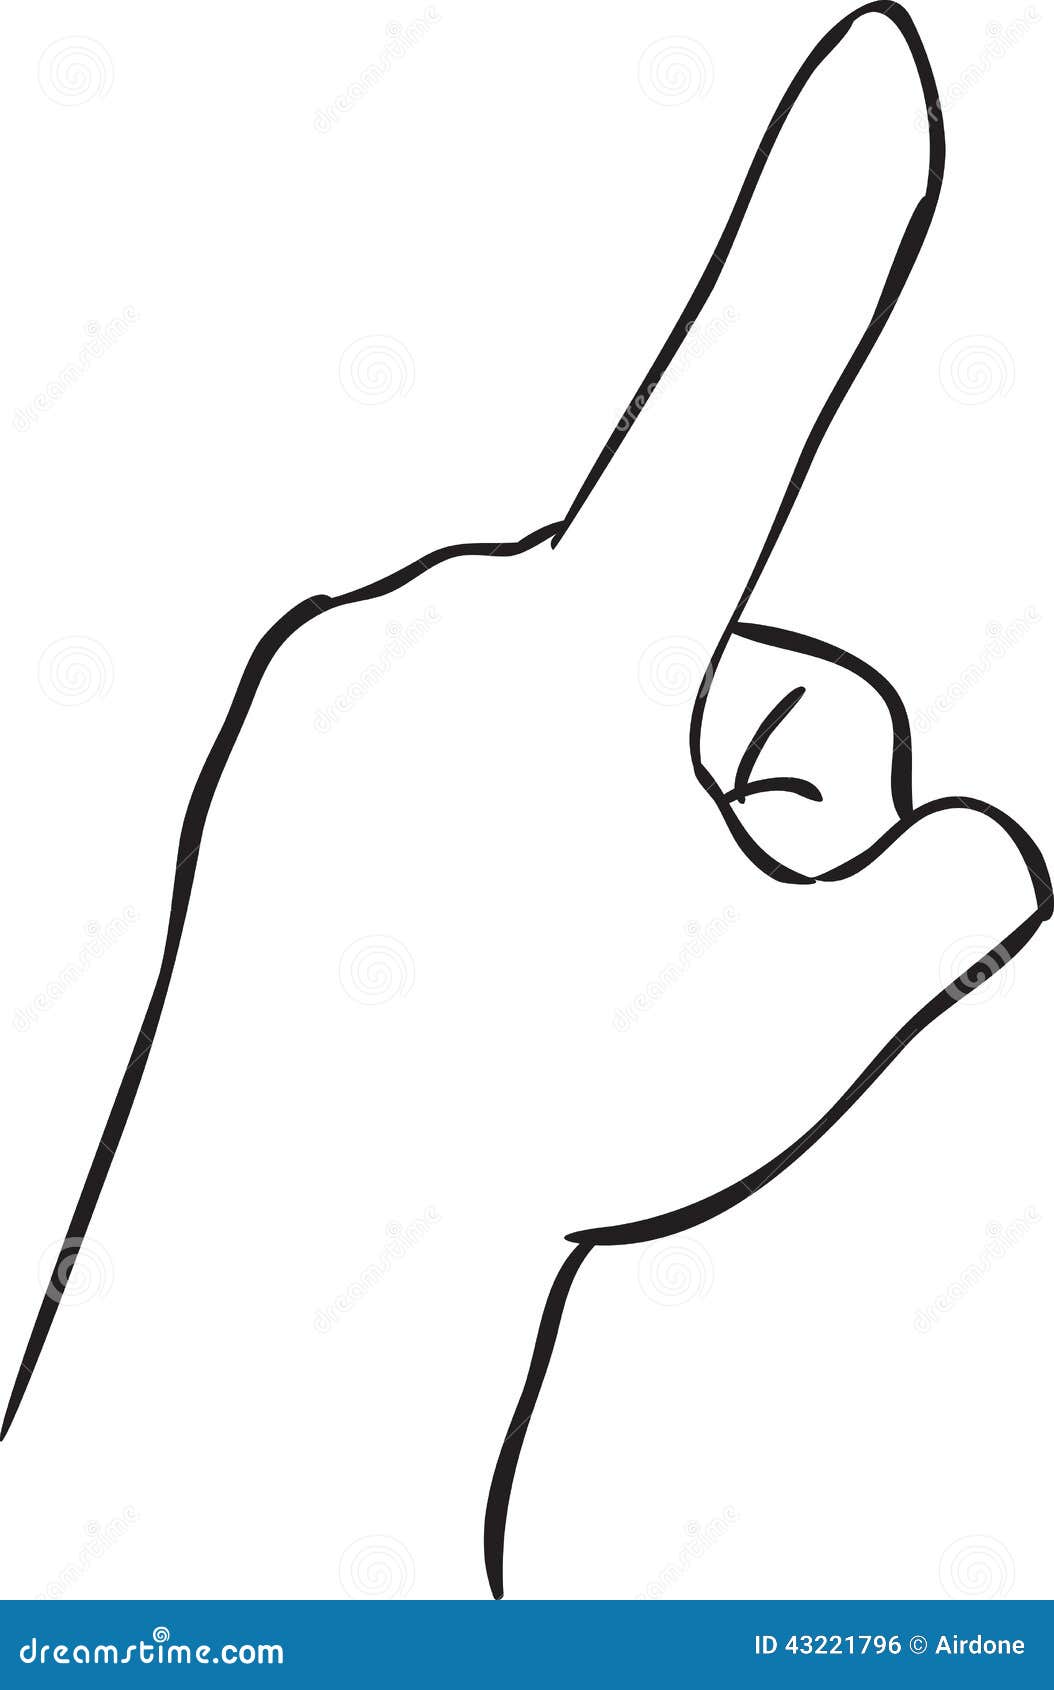 Human hand with index finger up gesture in sketch Vector Image